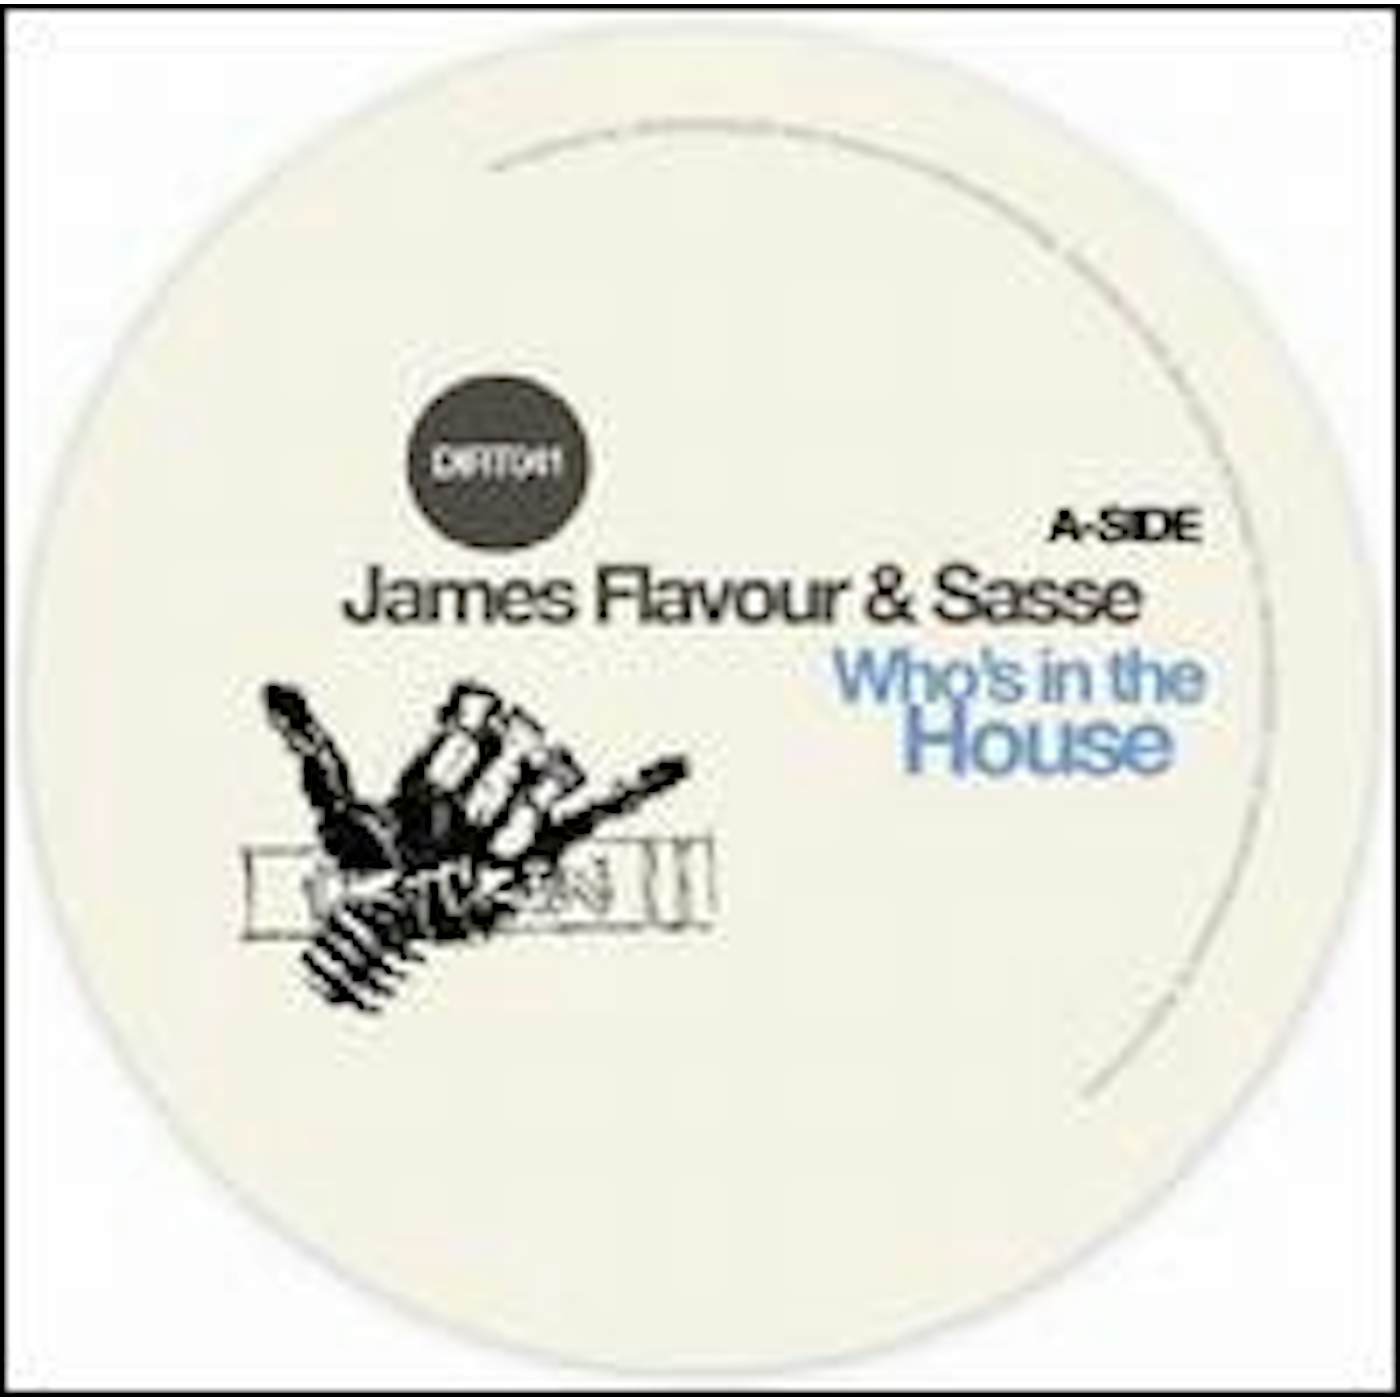 James Flavour & Sasse Who's In The House Vinyl Record